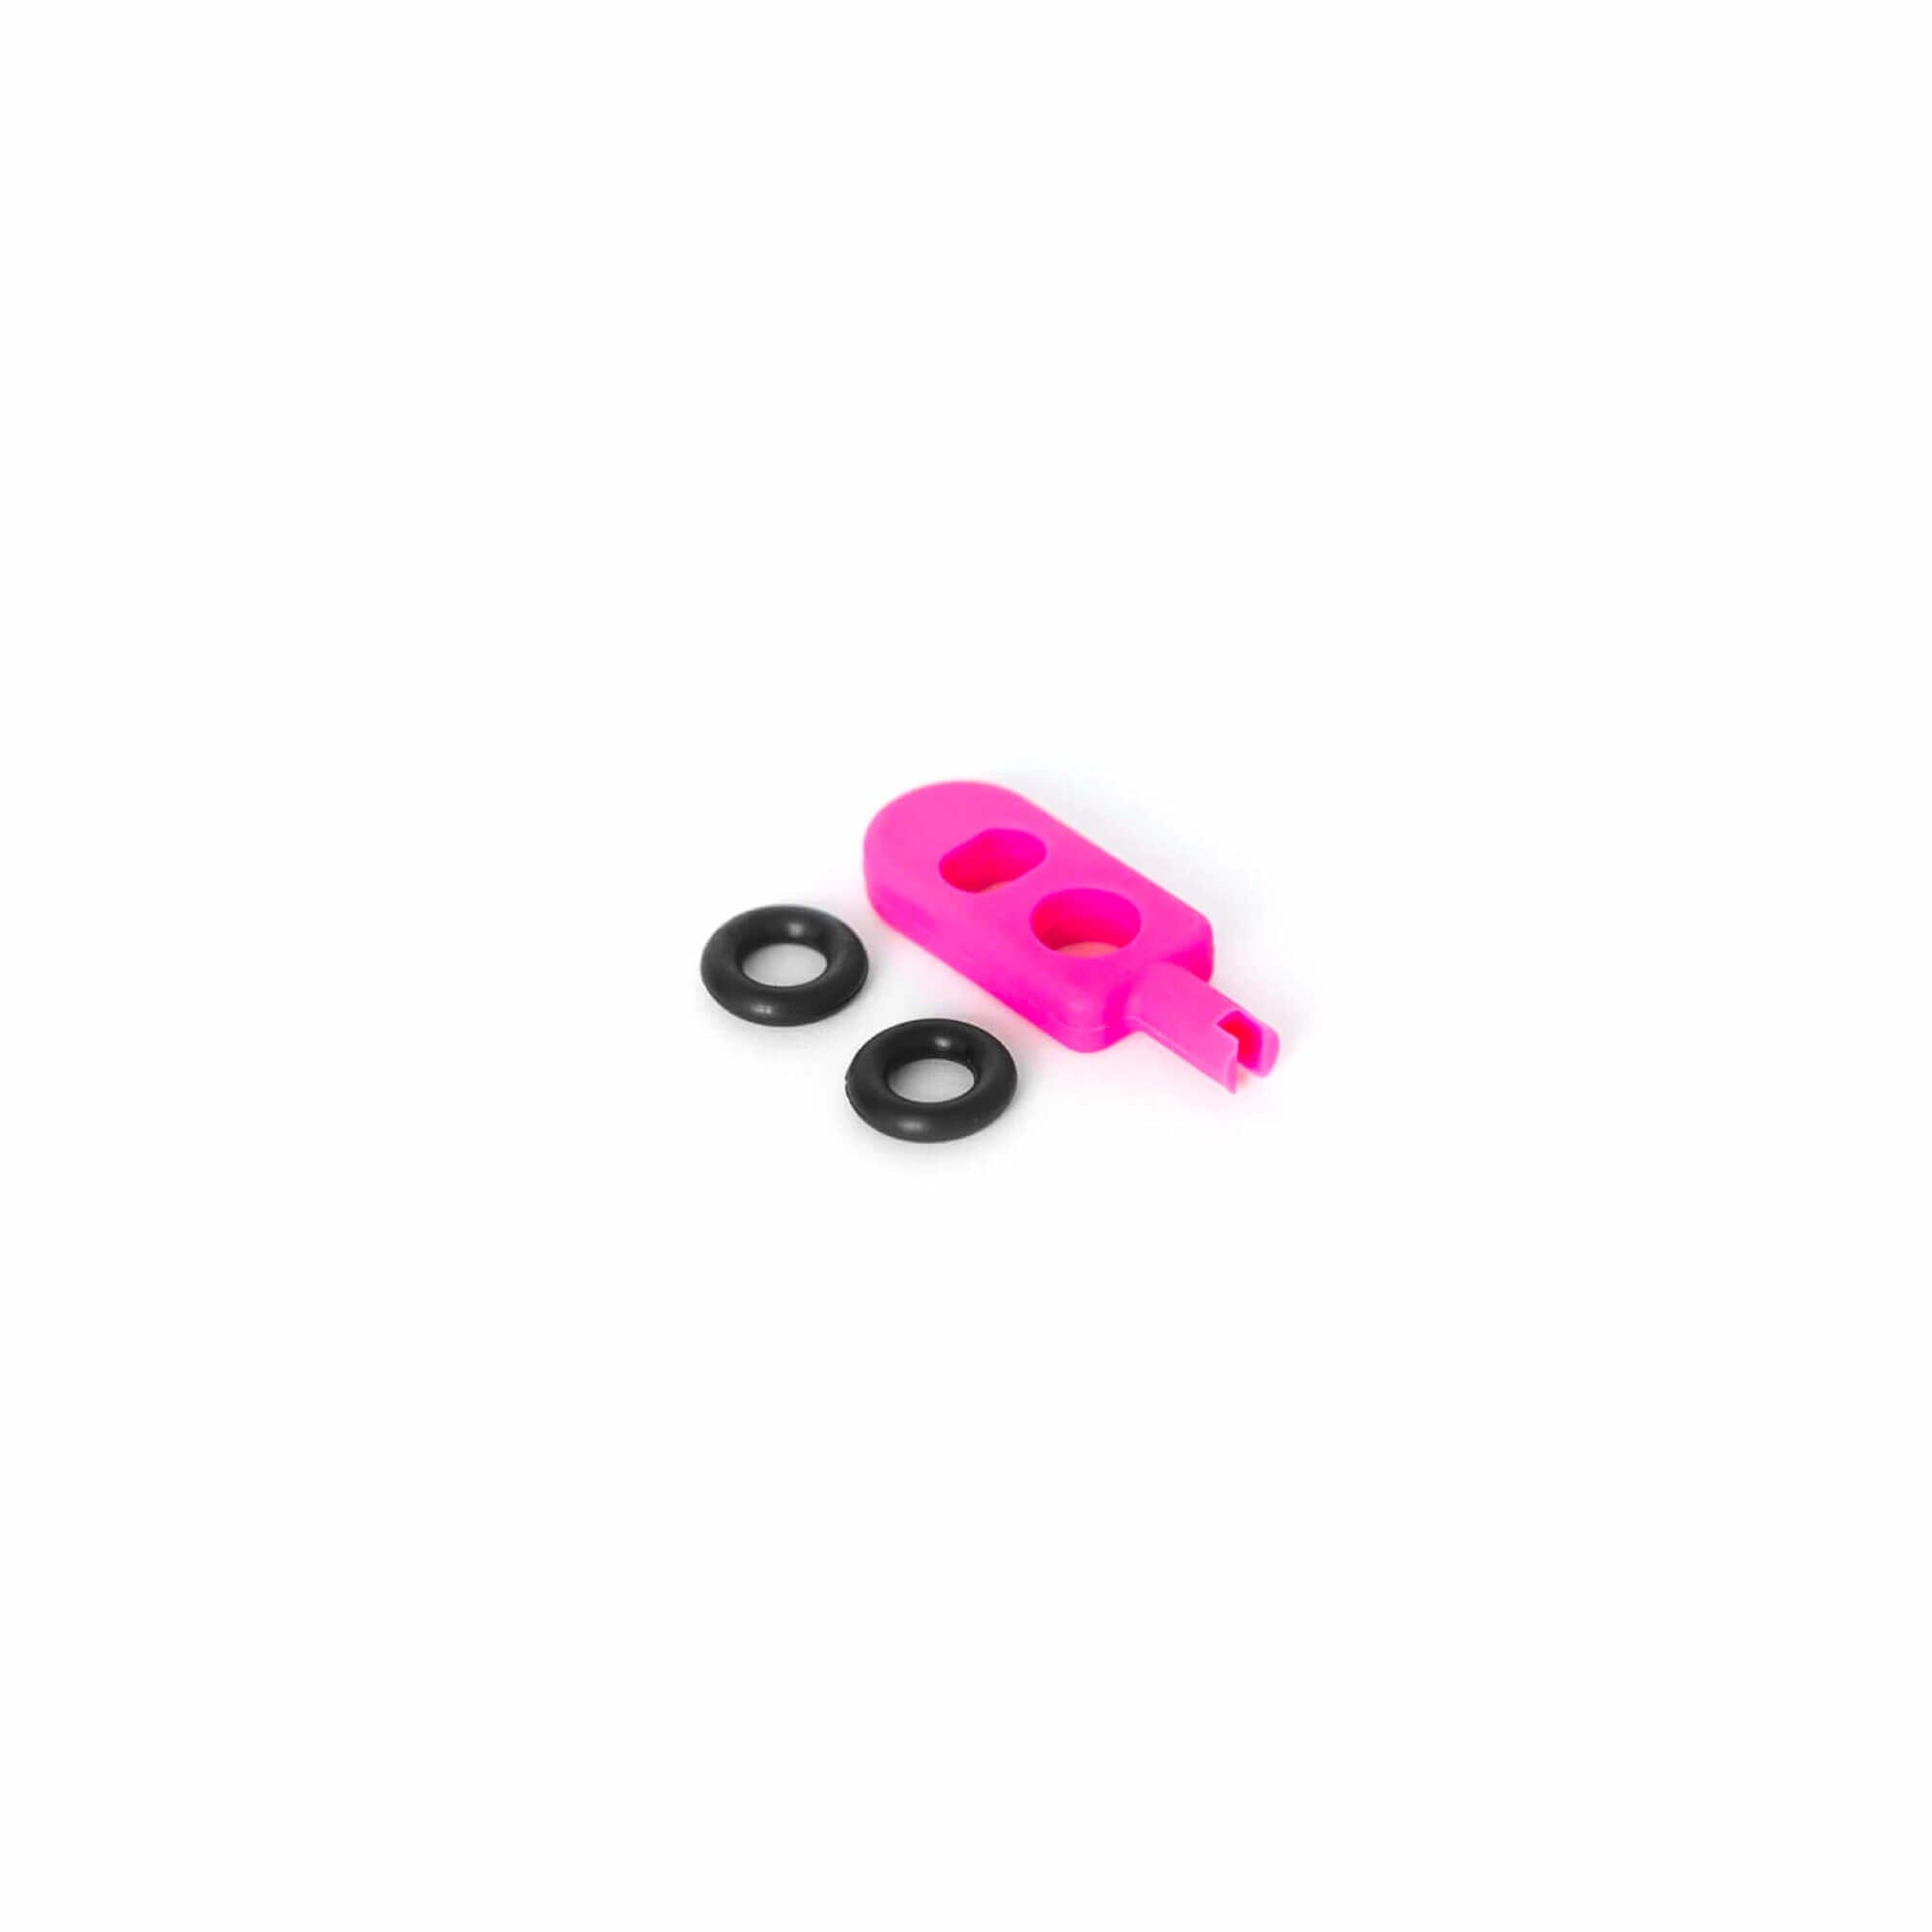 Muc-off Sealant No Puncture 140ml Kit TUBELESS ACCESSORIES Melbourne Powered Electric Bikes 